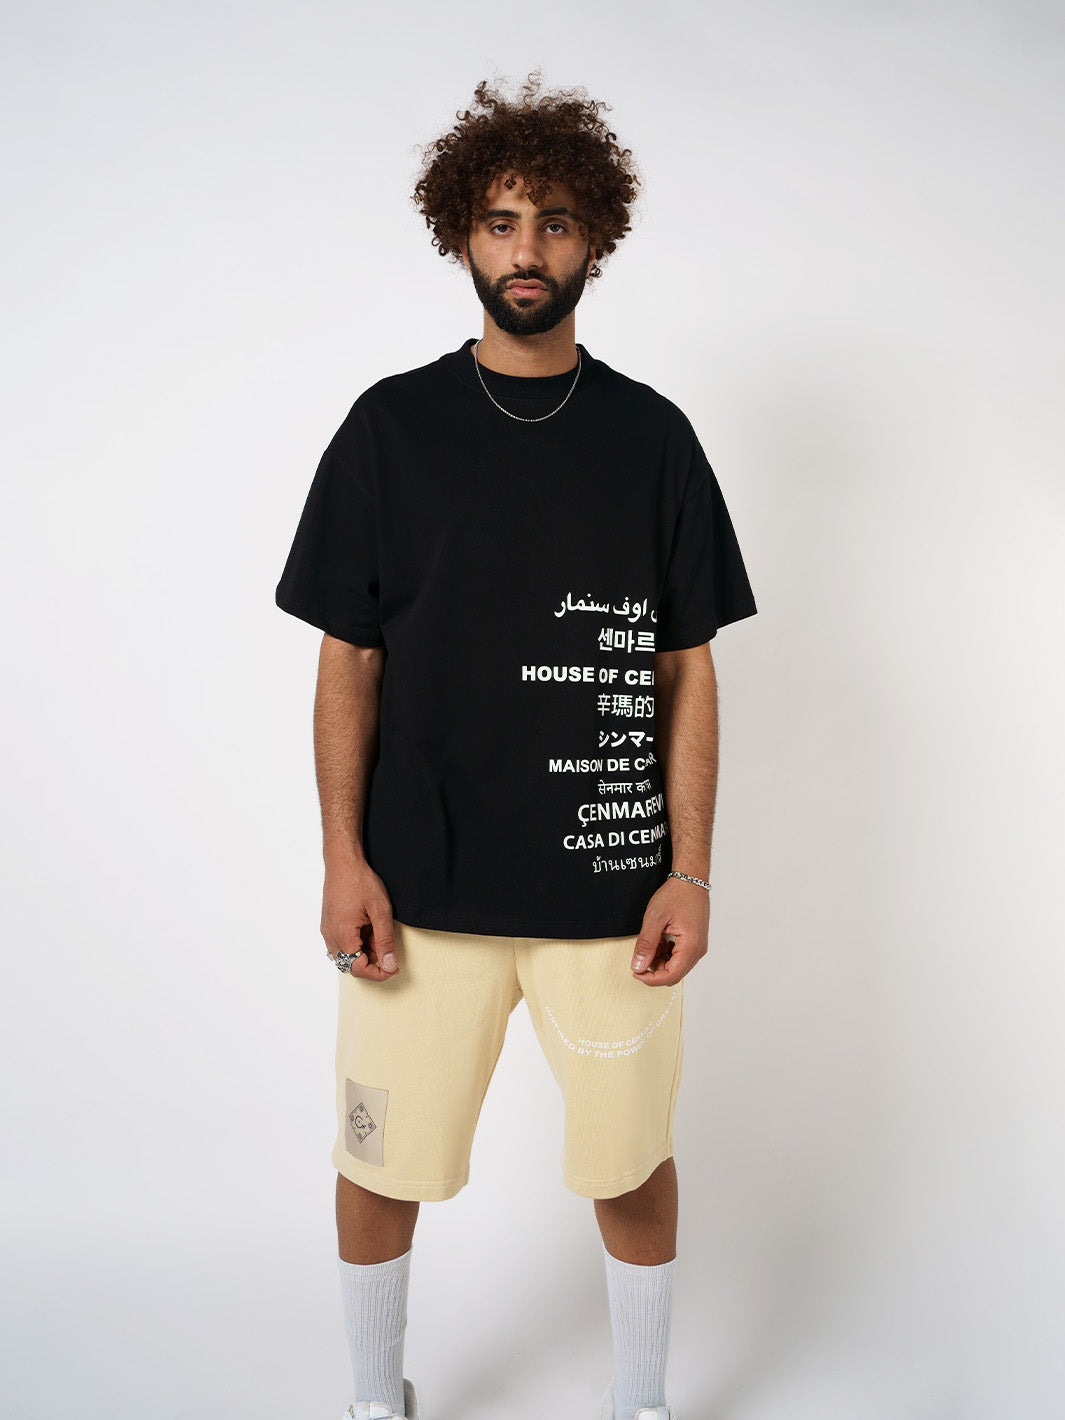 BLACK T-SHIRT WITH ” HOUSE OF CENMAR” IN MULTI-LANGUAGES